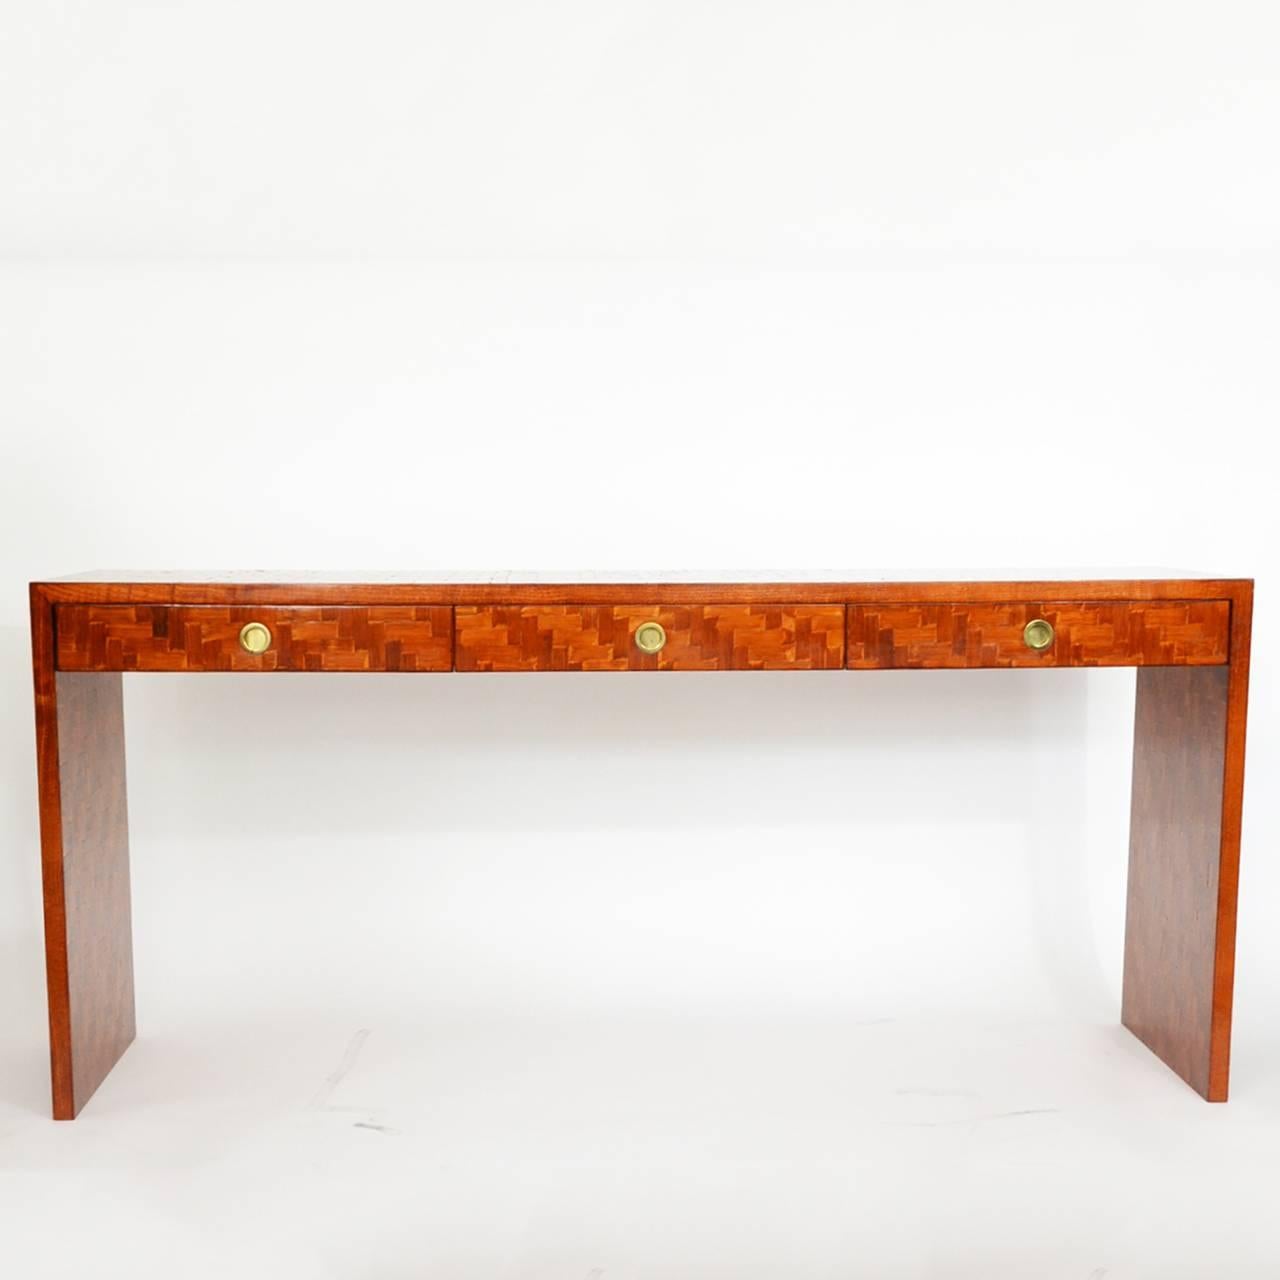 1970s console table by Vivai del Sud.
Made in wood with a motif created from interwoven wood veener.
Three drawers with brass handle.